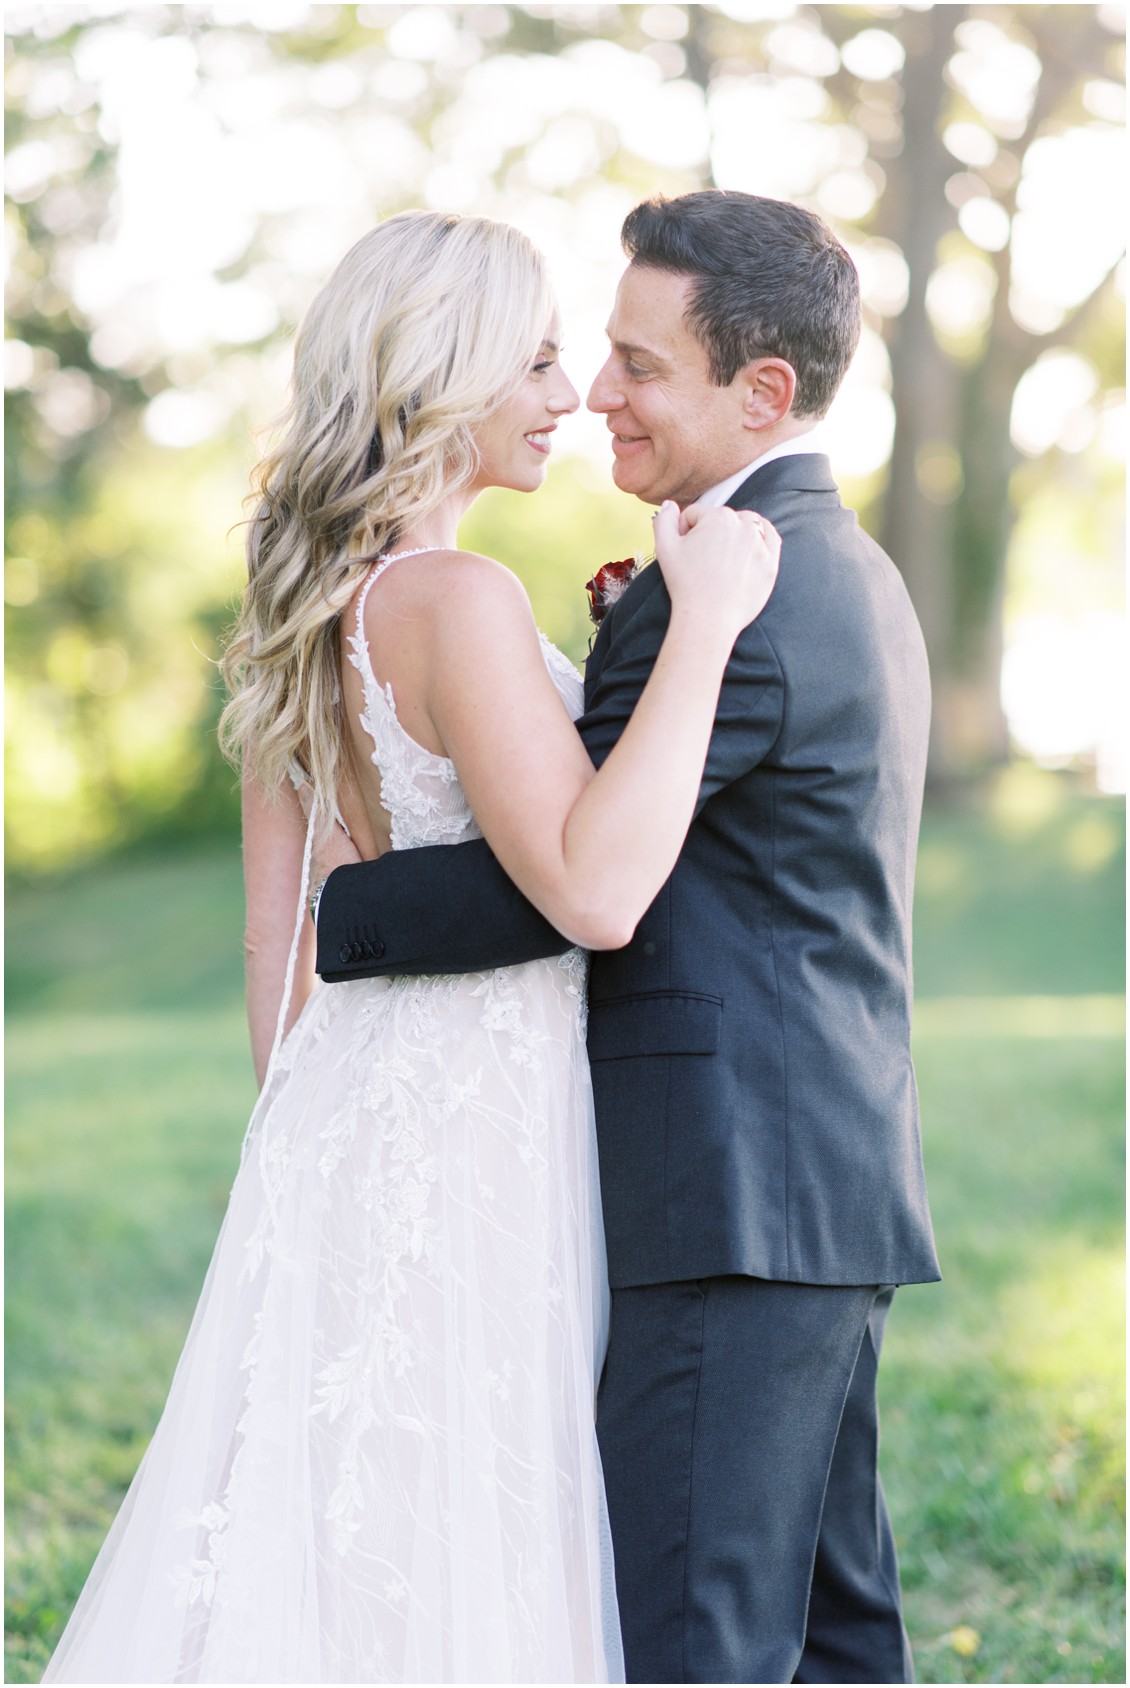 Bride and Groom portrait | My Eastern Shore Wedding | Hannah Belle Events | Eastern Shore Tents and Events